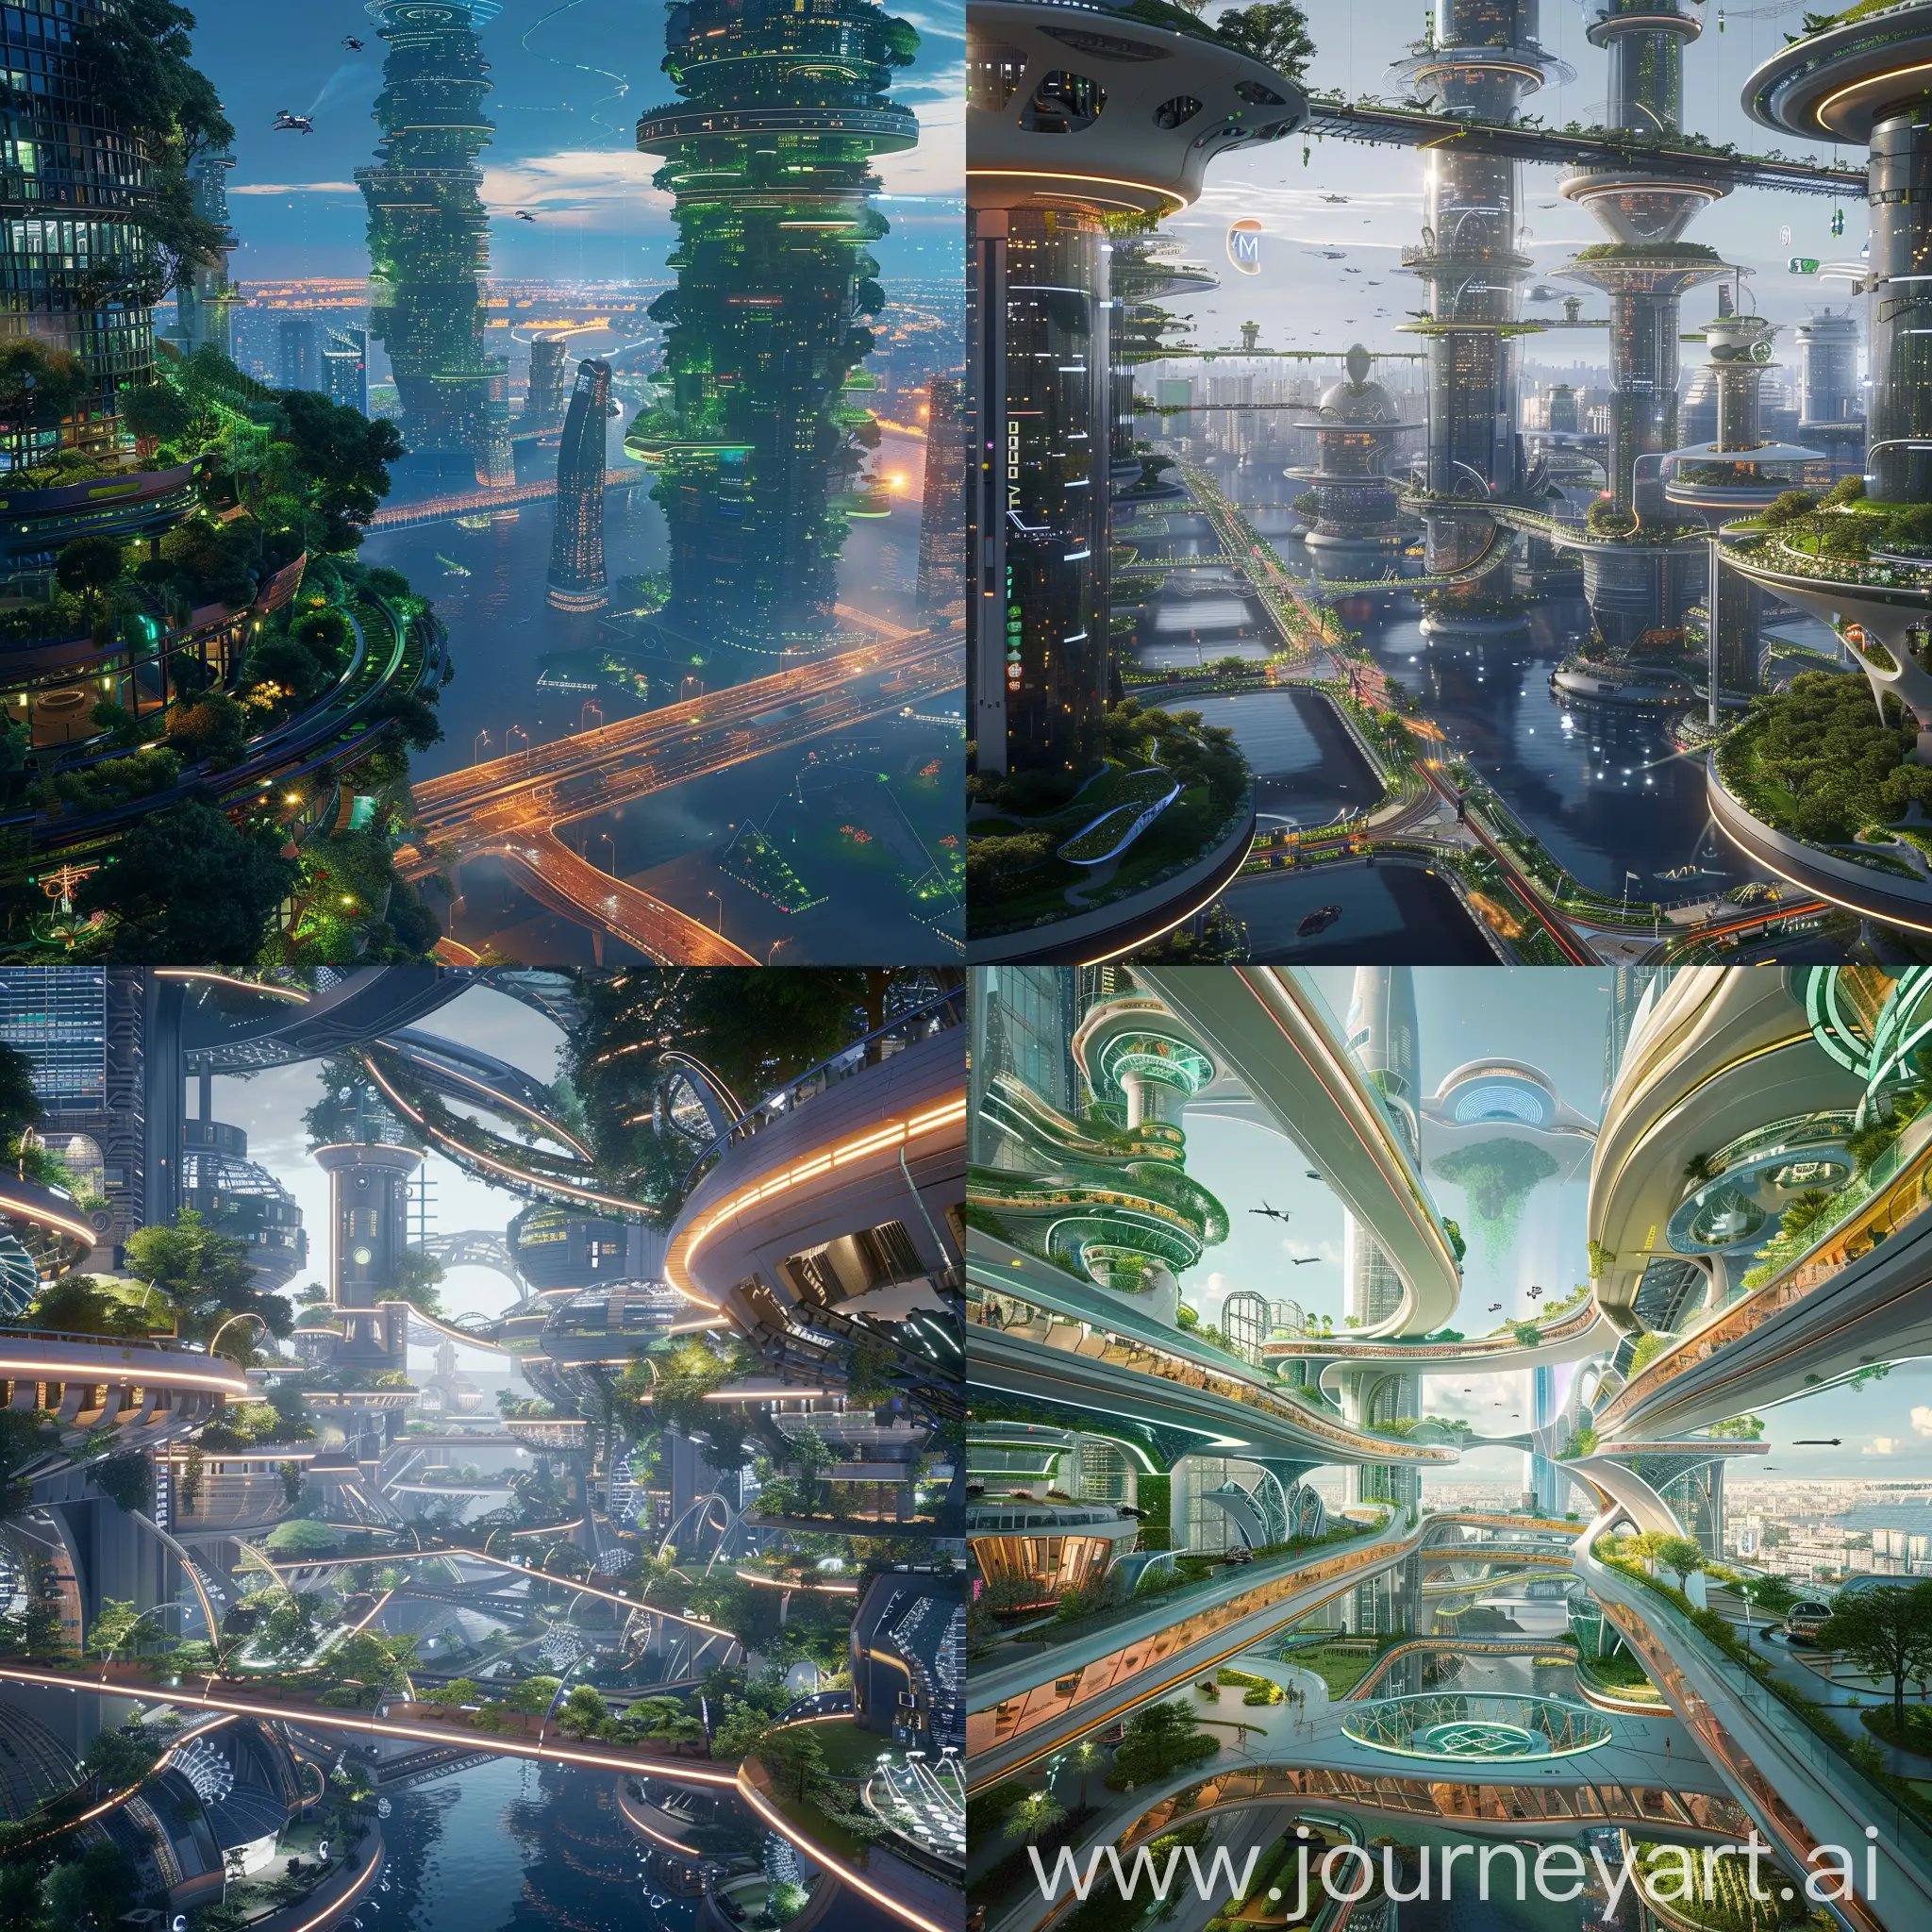 High-tech futuristic Vladivostok, Vertical Bioponic Farms, AI-Powered Waste Management, Hyperloop Transportation Hubs, Augmented Reality Public Spaces, Modular Micro-Apartments, Co-Working with a View, Smart Grid Infrastructure, 3D-Printed Infrastructure, Community-Driven Green Spaces, Adaptive Learning Classrooms, Kinetic Facades, Hydroponic Skyscrapers, Skybridges and Walkways, Light Shows and Interactive Displays, Drone Delivery Stations, Vertical Parks and Hanging Gardens, Self-Driving Cars and Public Transportation, Underwater Observation Decks, Weather-Adaptive Roofs, Spaceport Gateway, unreal engine 5 --stylize 1000